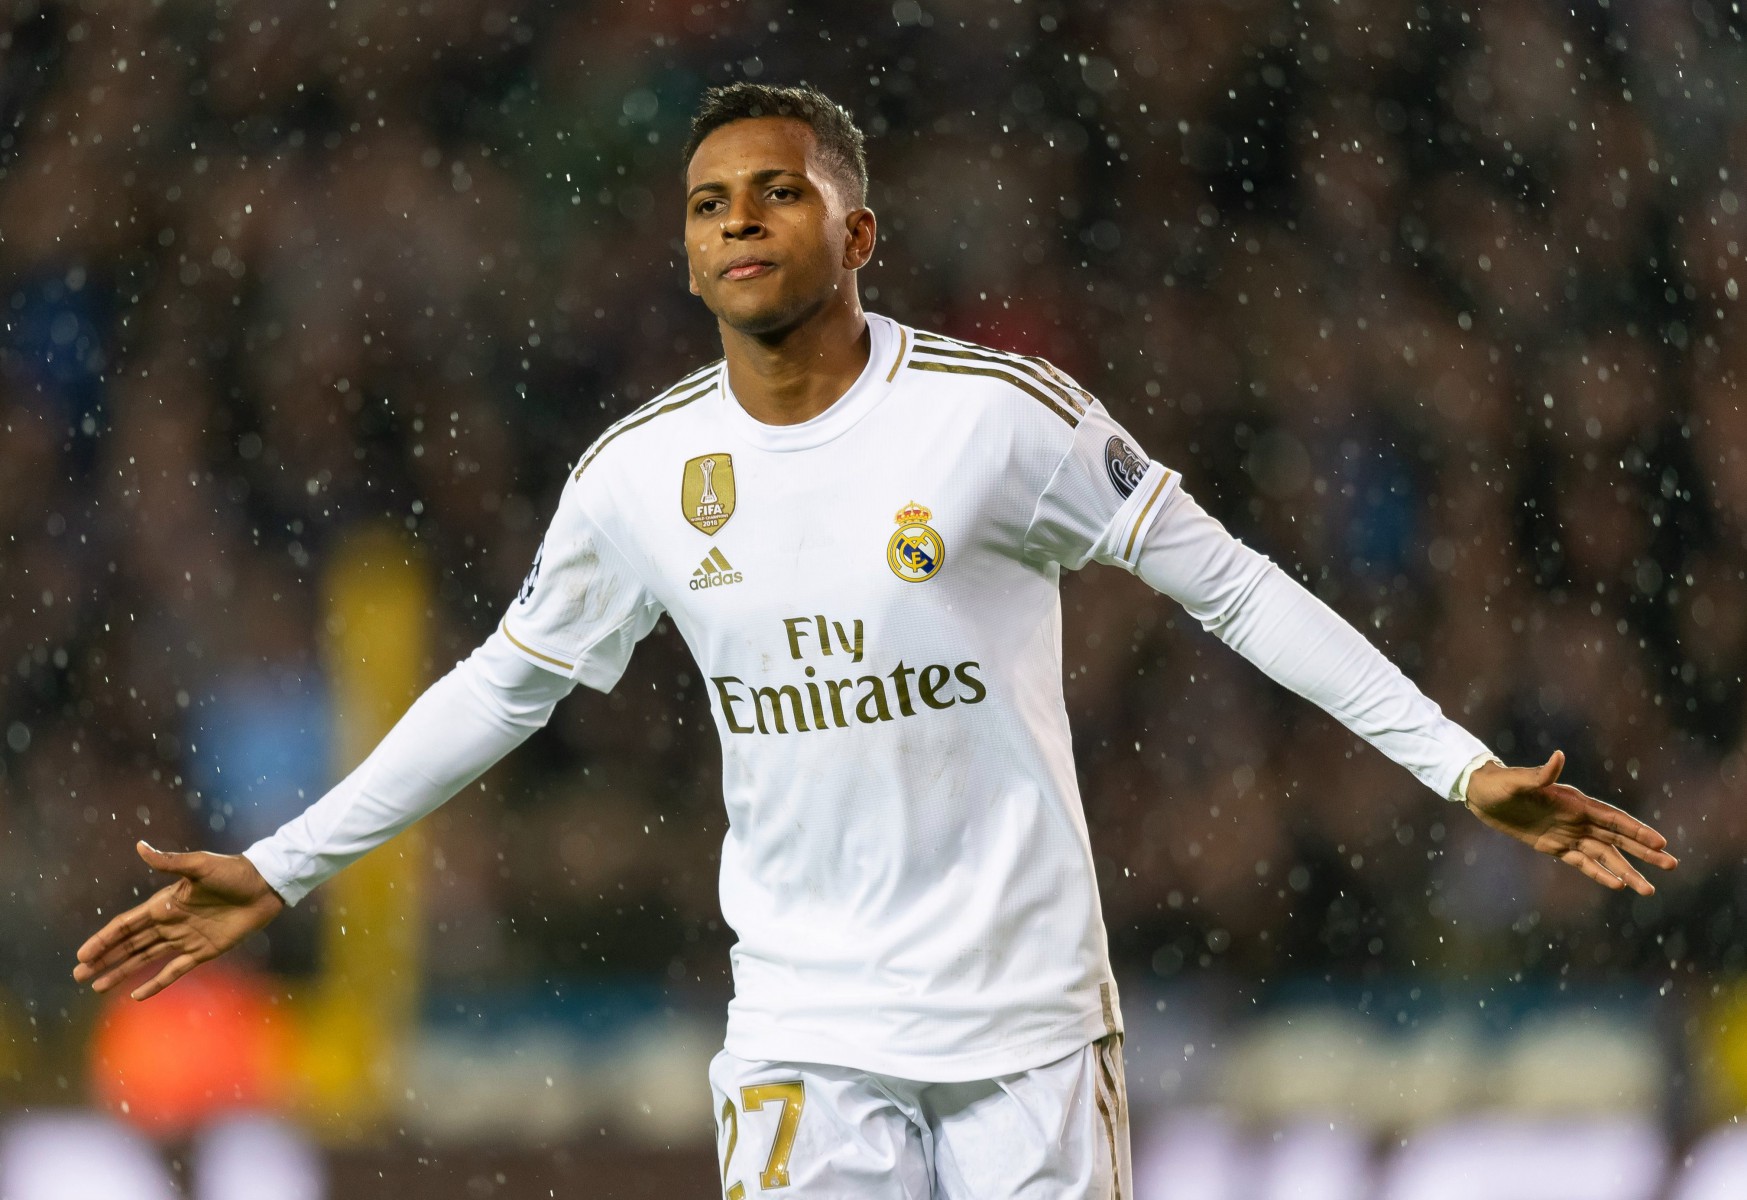 Rodrygo is the youngest player to score a Champions League hat-trick